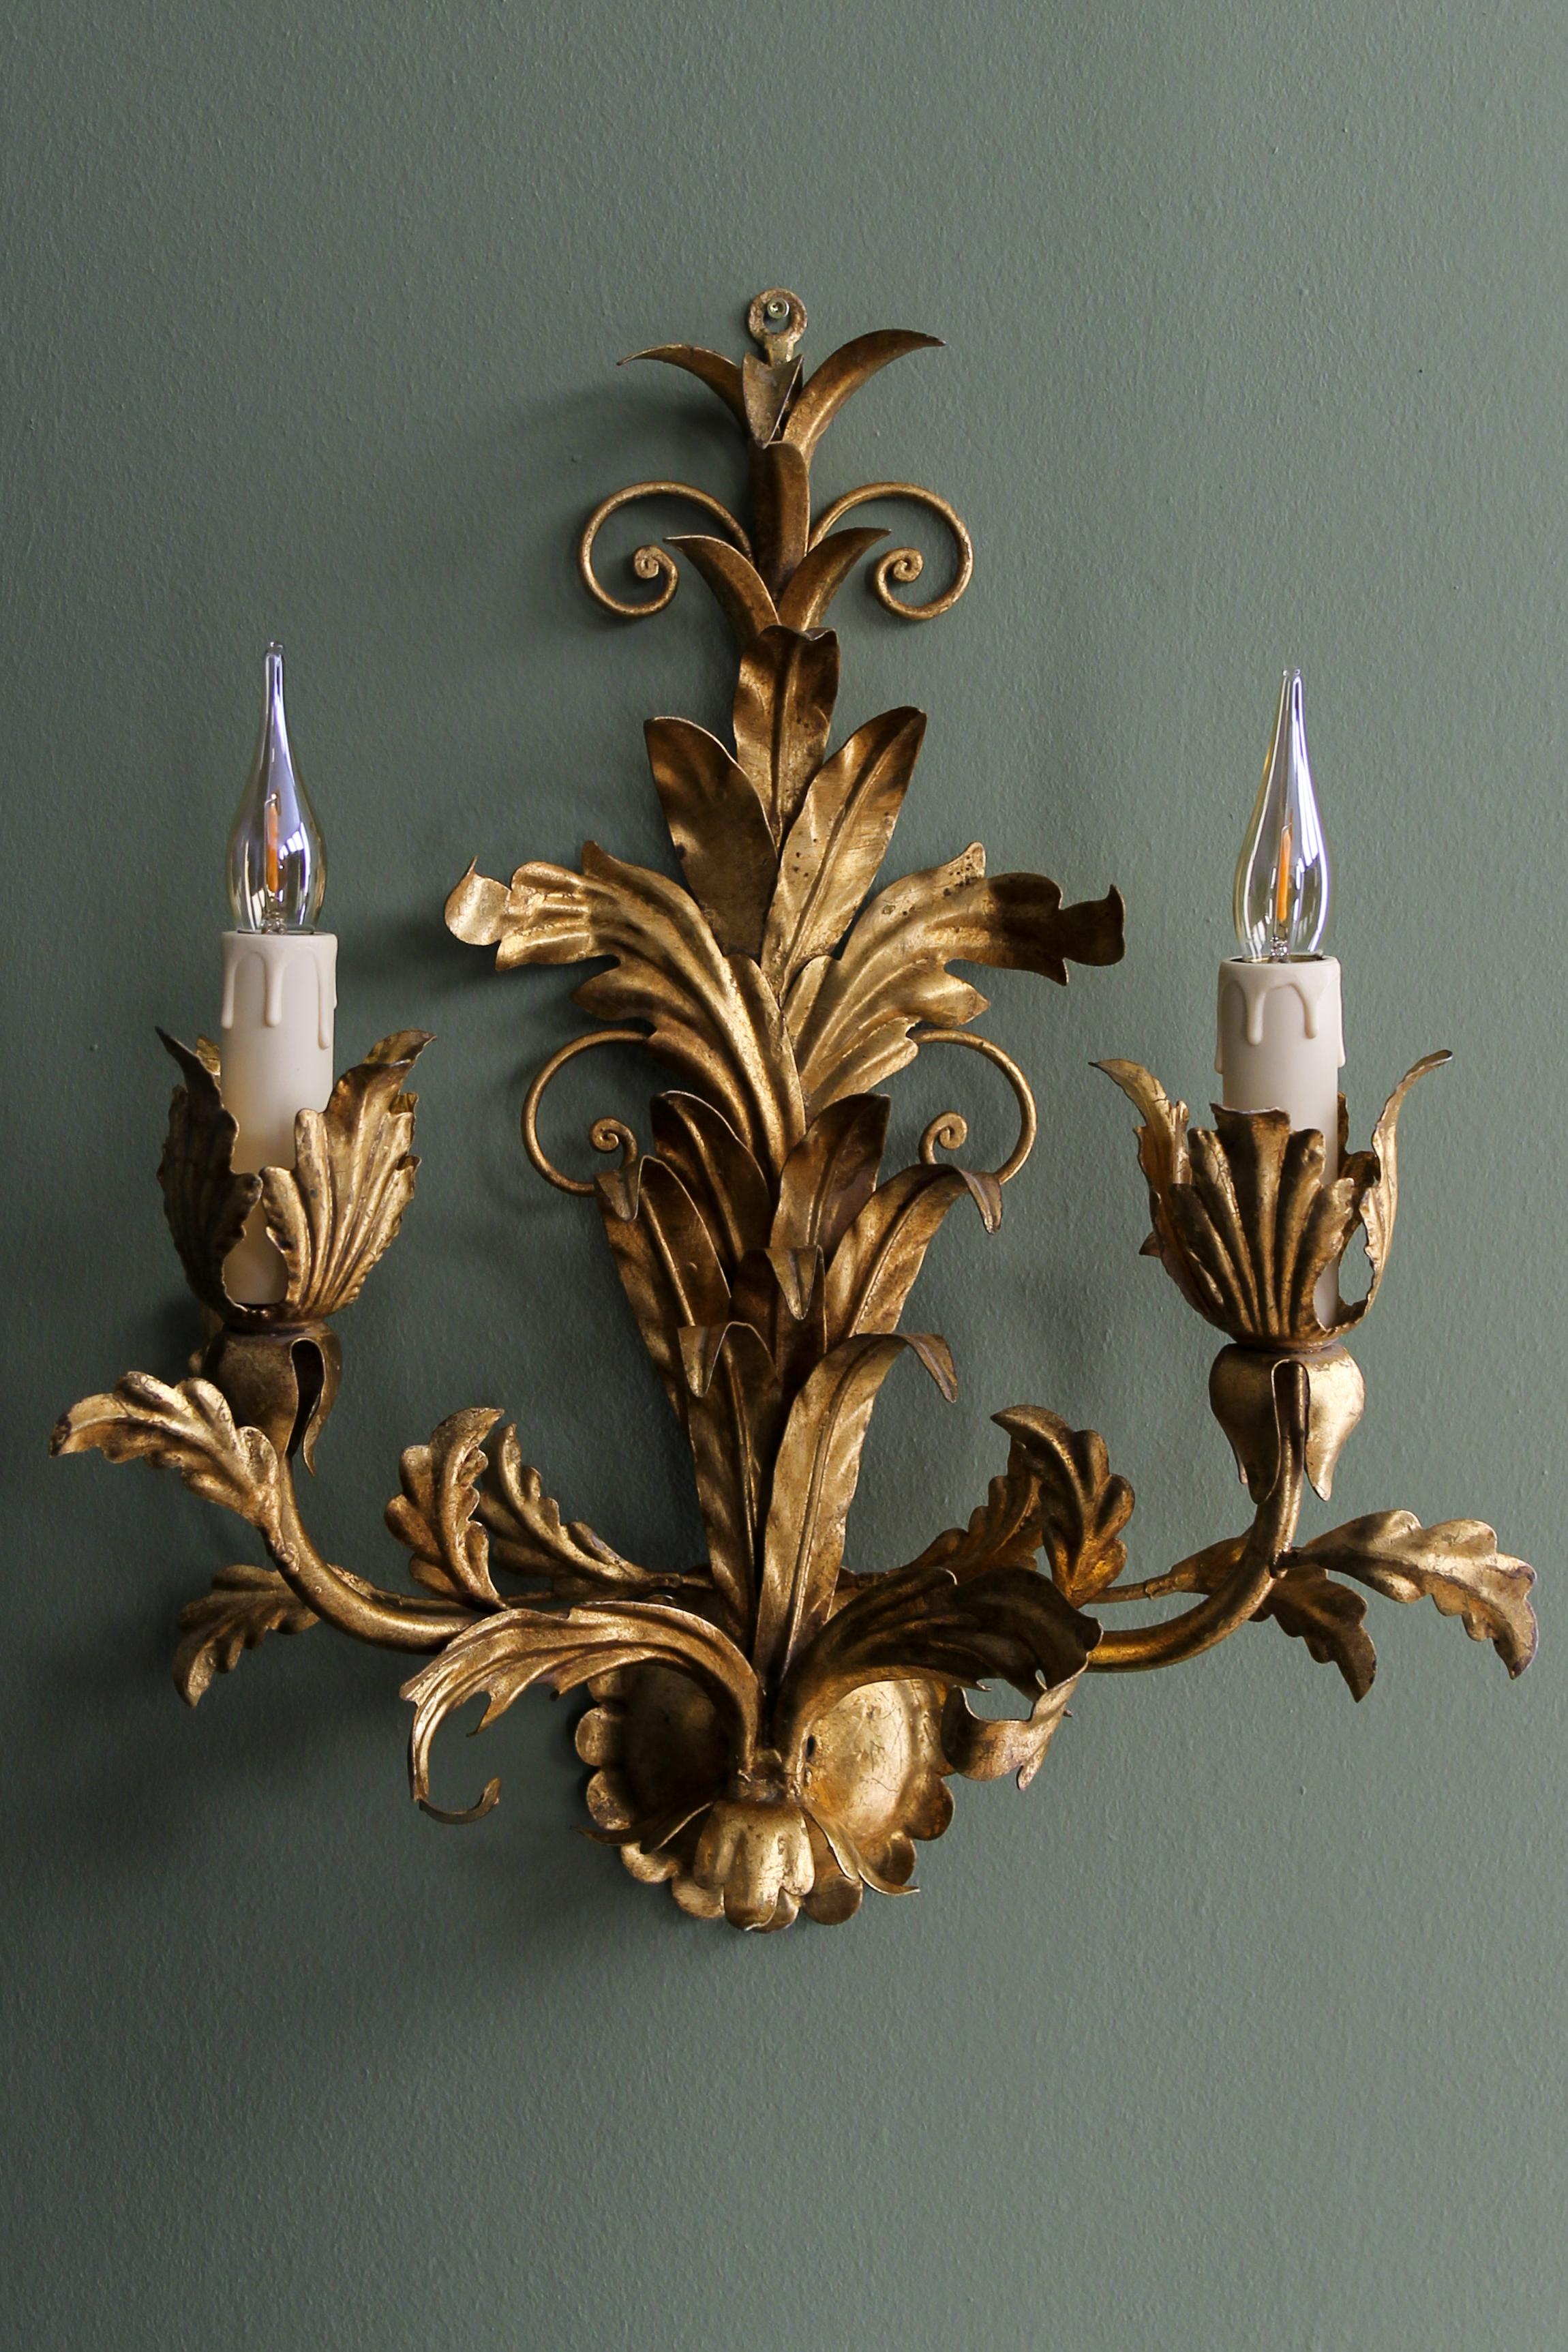 Hollywood Regency style gilt metal two-light sconce, attributed to Hans Kögl, from ca. 1970s.
This beautiful Hollywood Regency-style gilt metal wall lamp features foliate motifs and two arms with sockets for E14 light bulbs.
Dimensions: height: 42